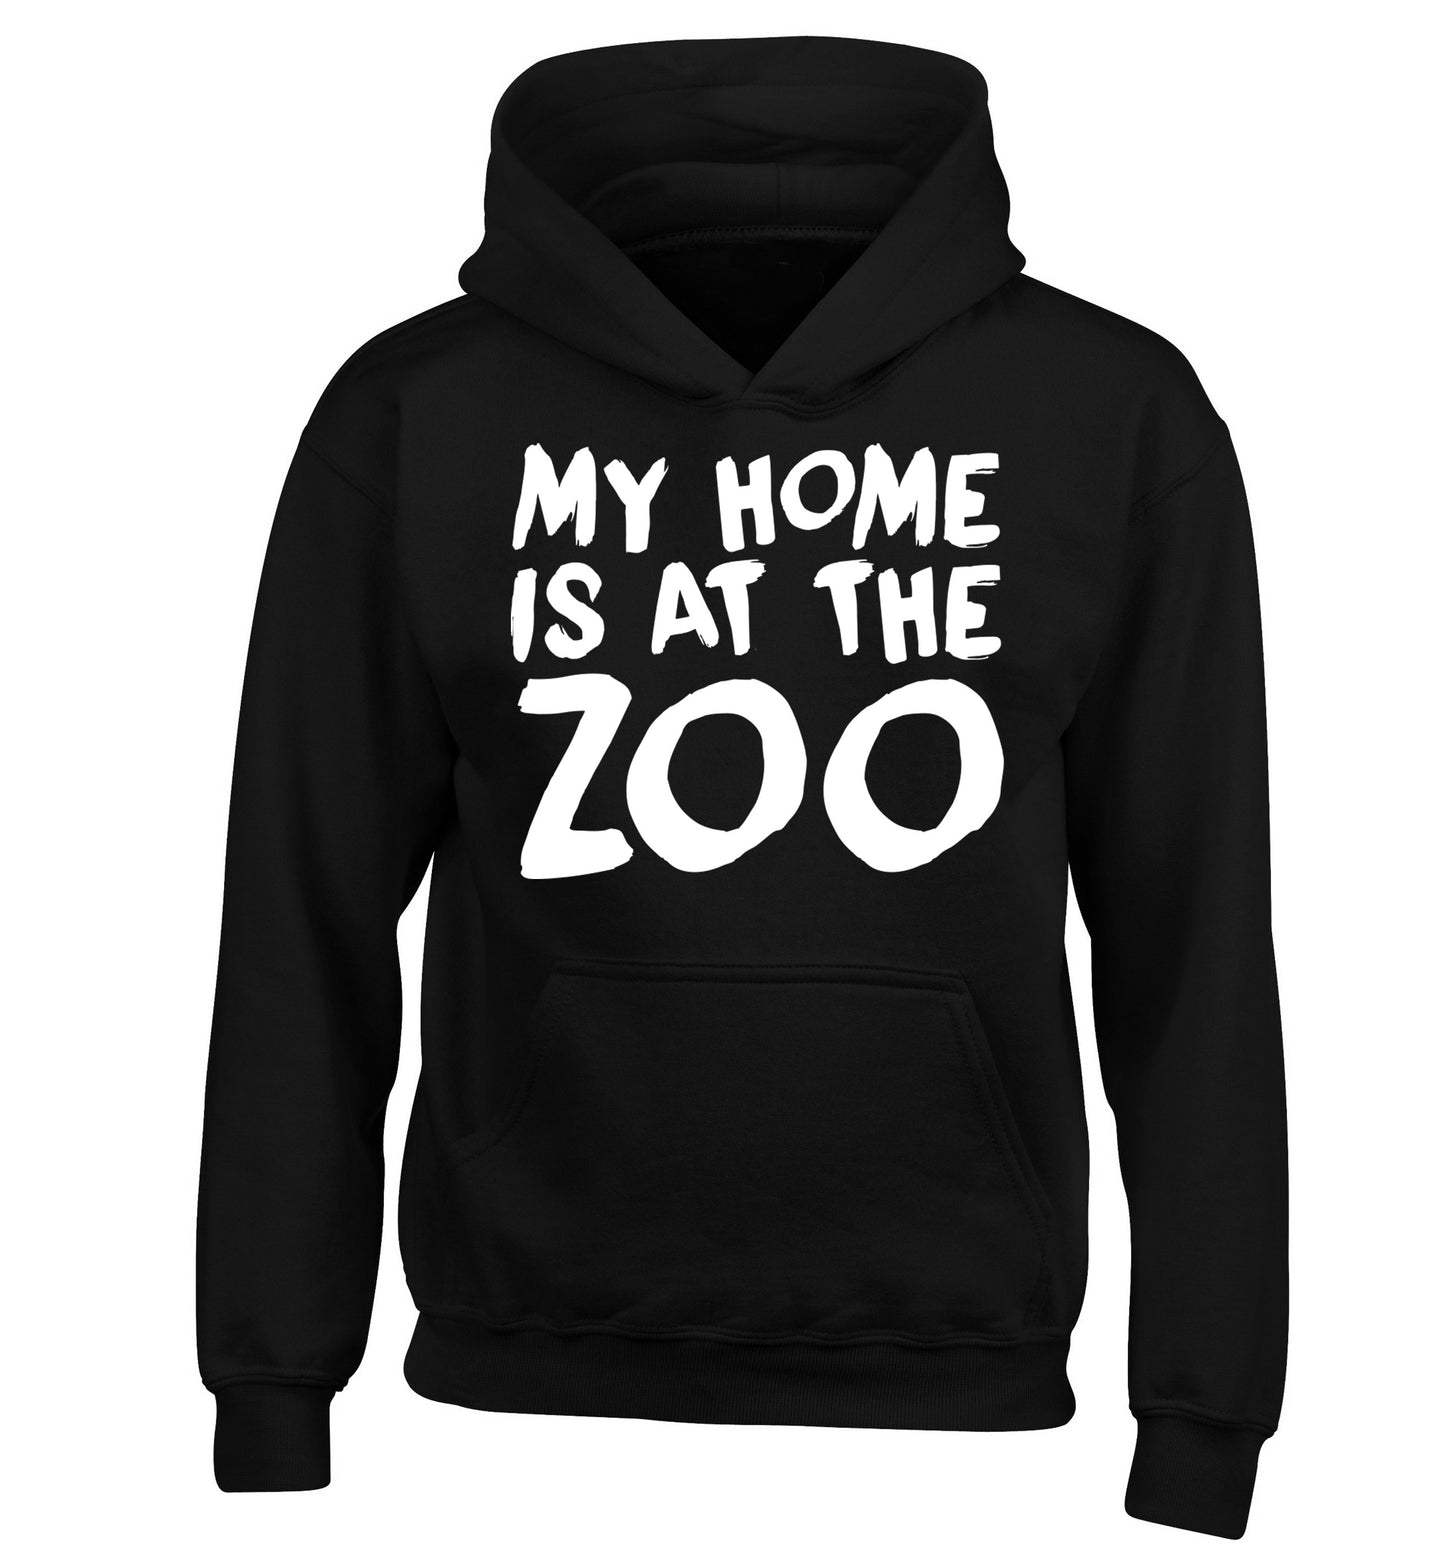 My home is at the zoo children's black hoodie 12-14 Years